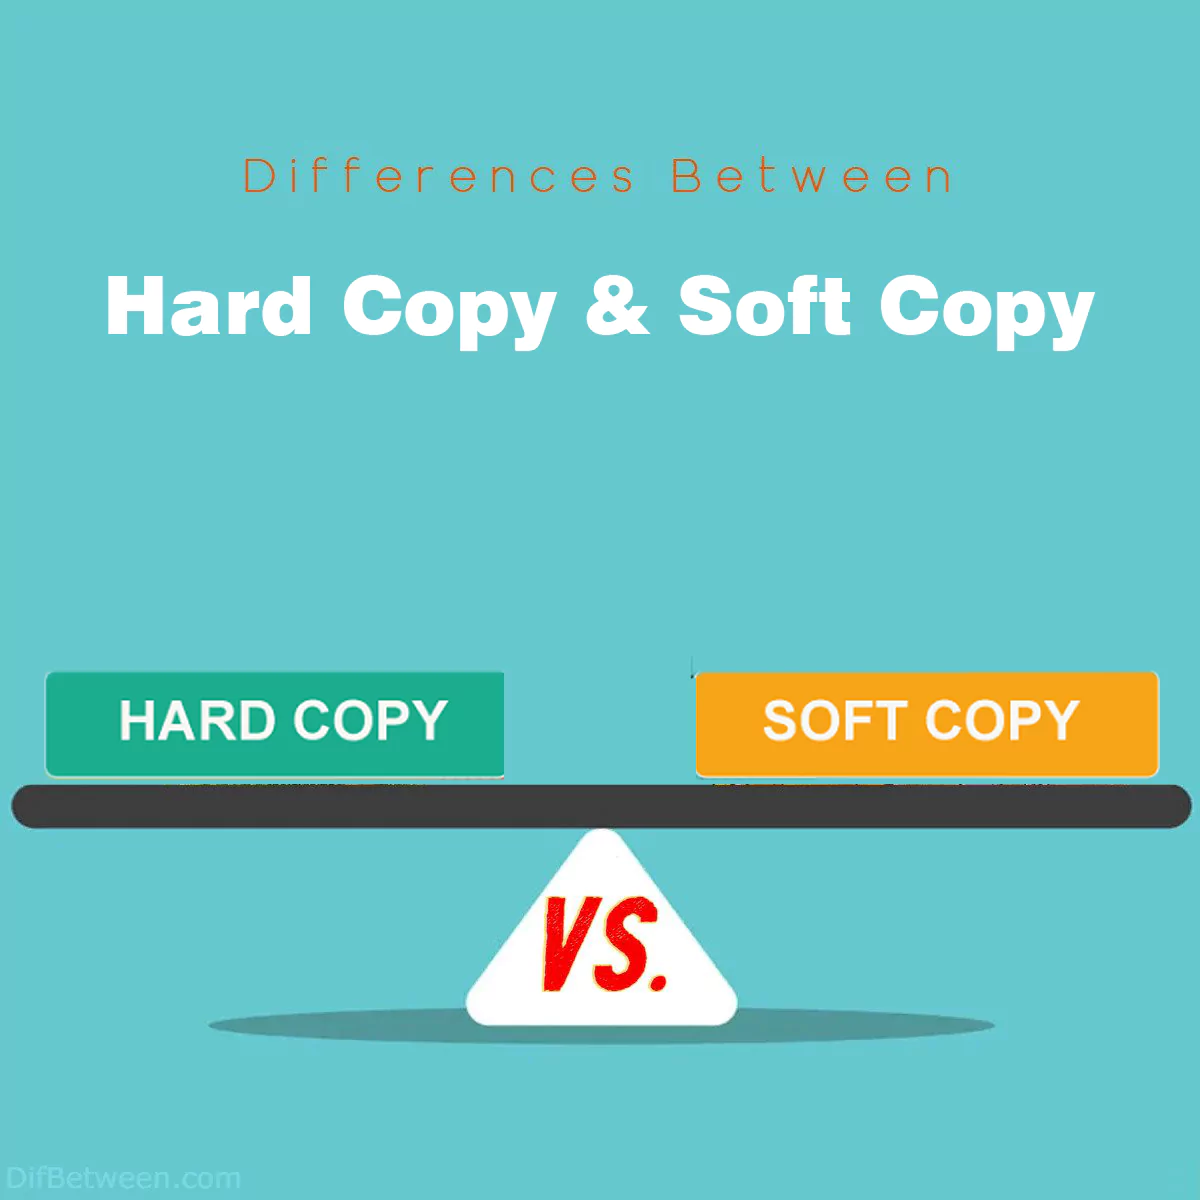 Differences Between Hard Copy and Soft Copy